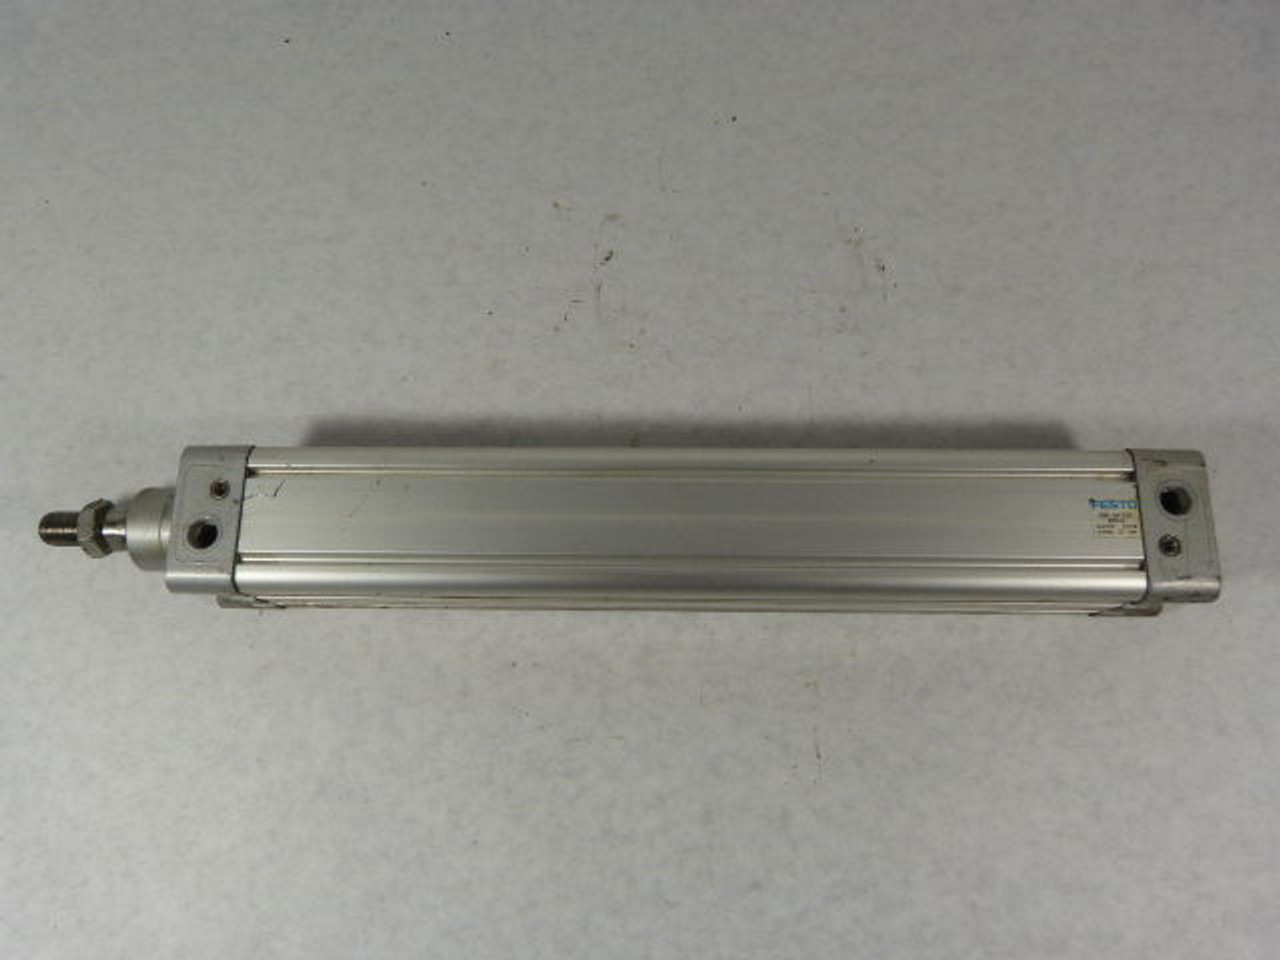 Festo 163378 DNC-50-320-PPV-A Pneumatic Cylinder 50mm Bore 350mm Stroke USED